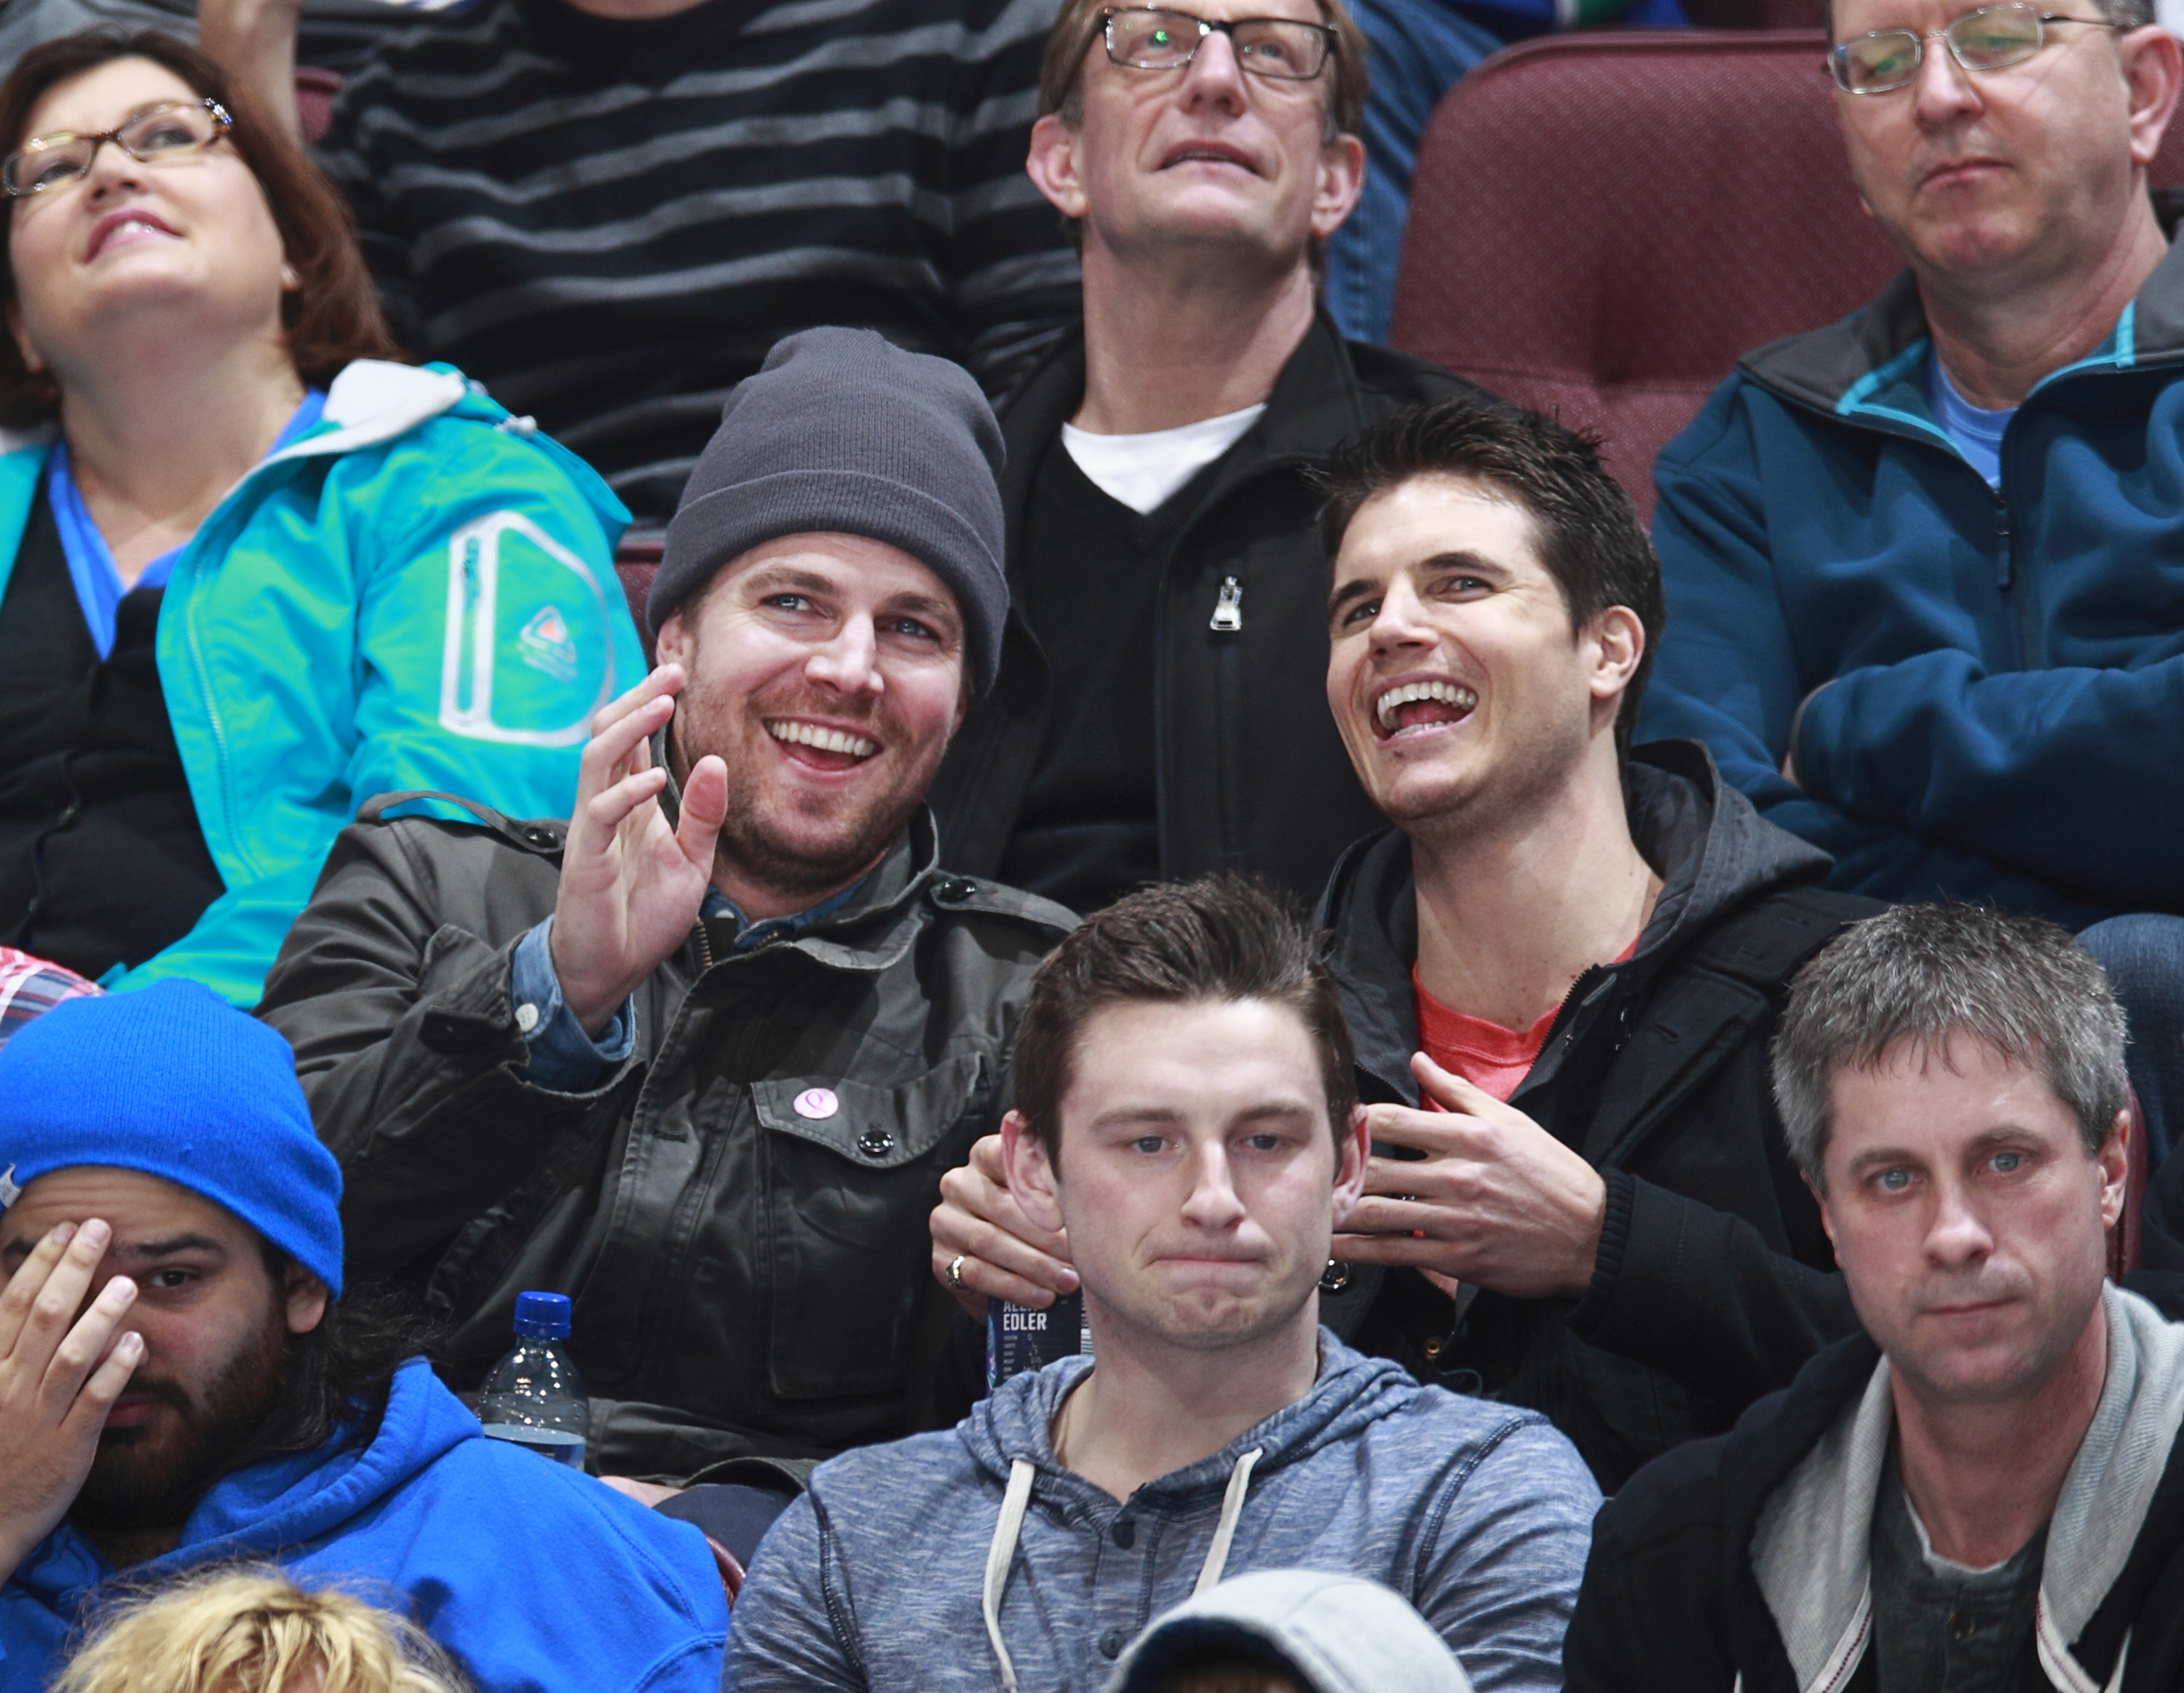 Stephen and Robbie Amell at the NHL game between the Vancouver Canucks and the Los Angeles Kings on April 5, 2014, in Vancouver, Canada. | Source: Getty Images